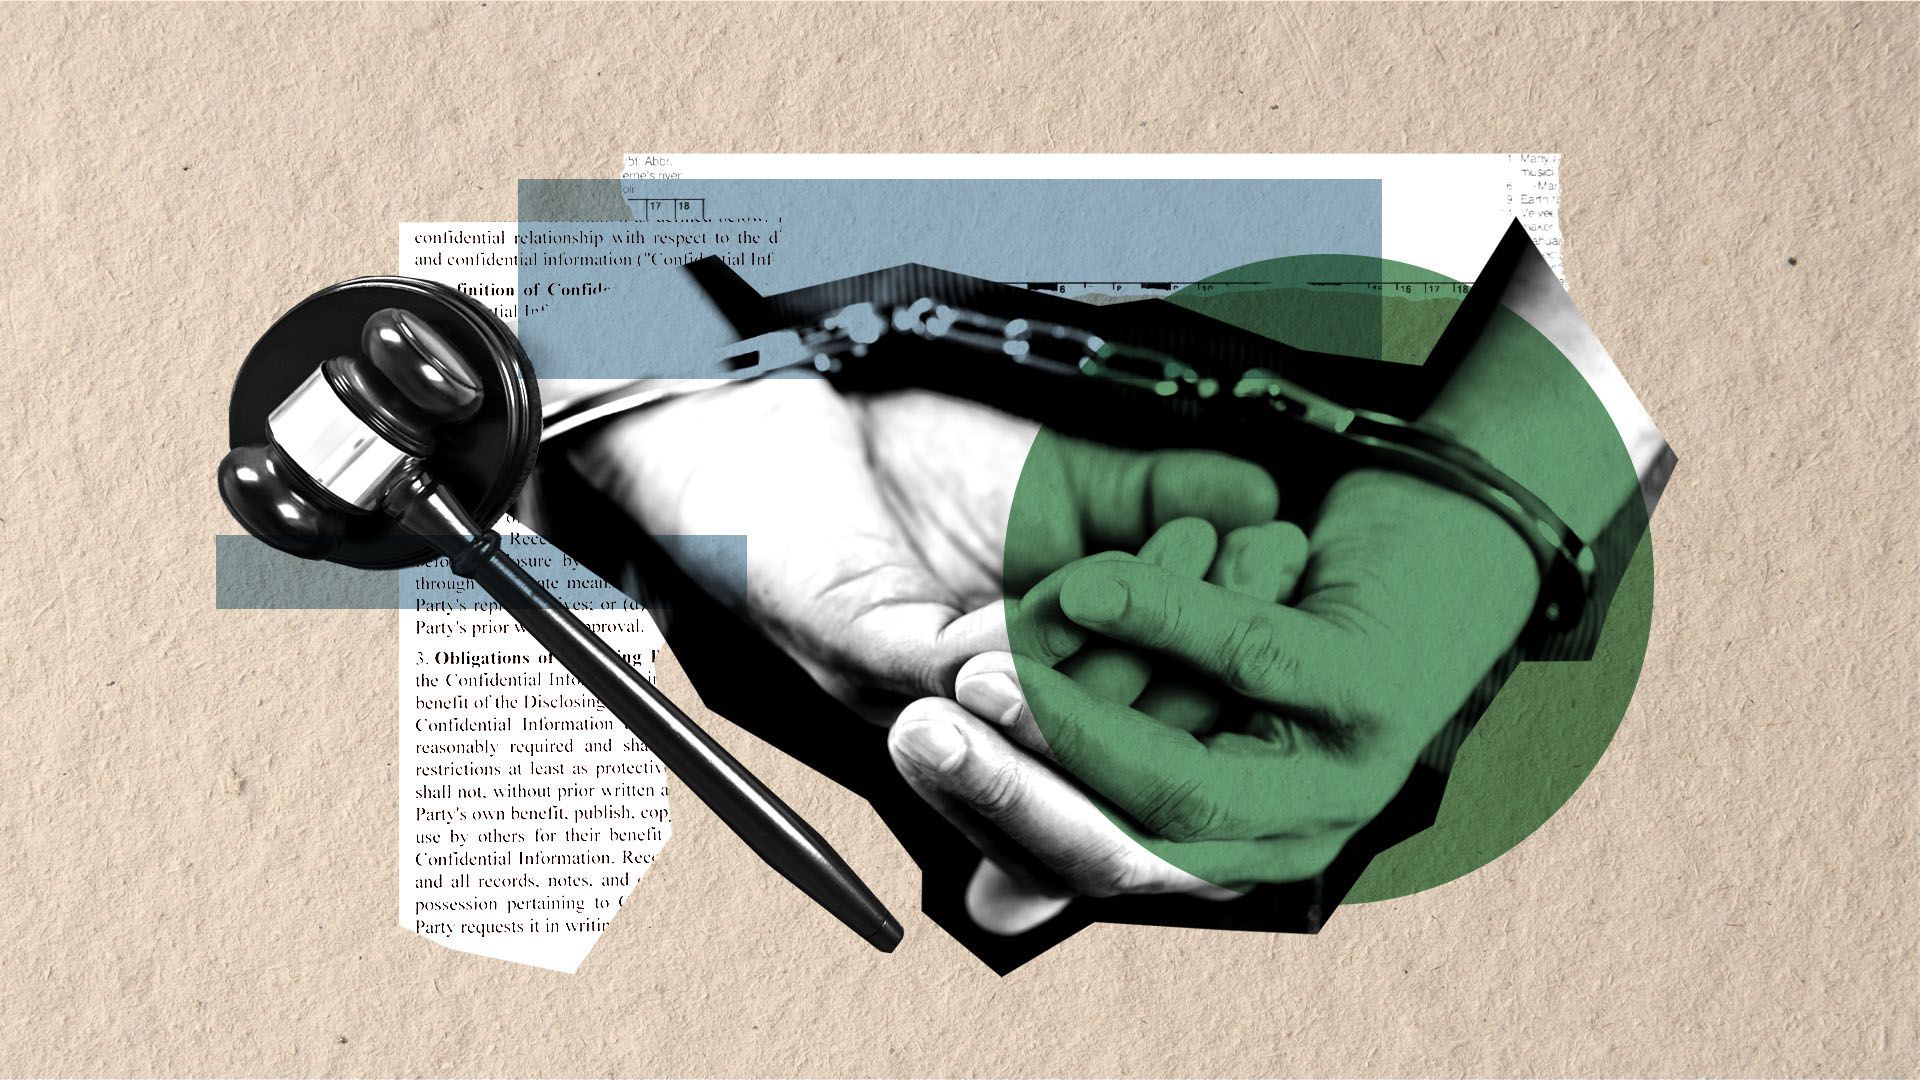 Illustrated collage of a hand in handcuffs, a judge's gavel, and pieces of paper surrounded by various shape